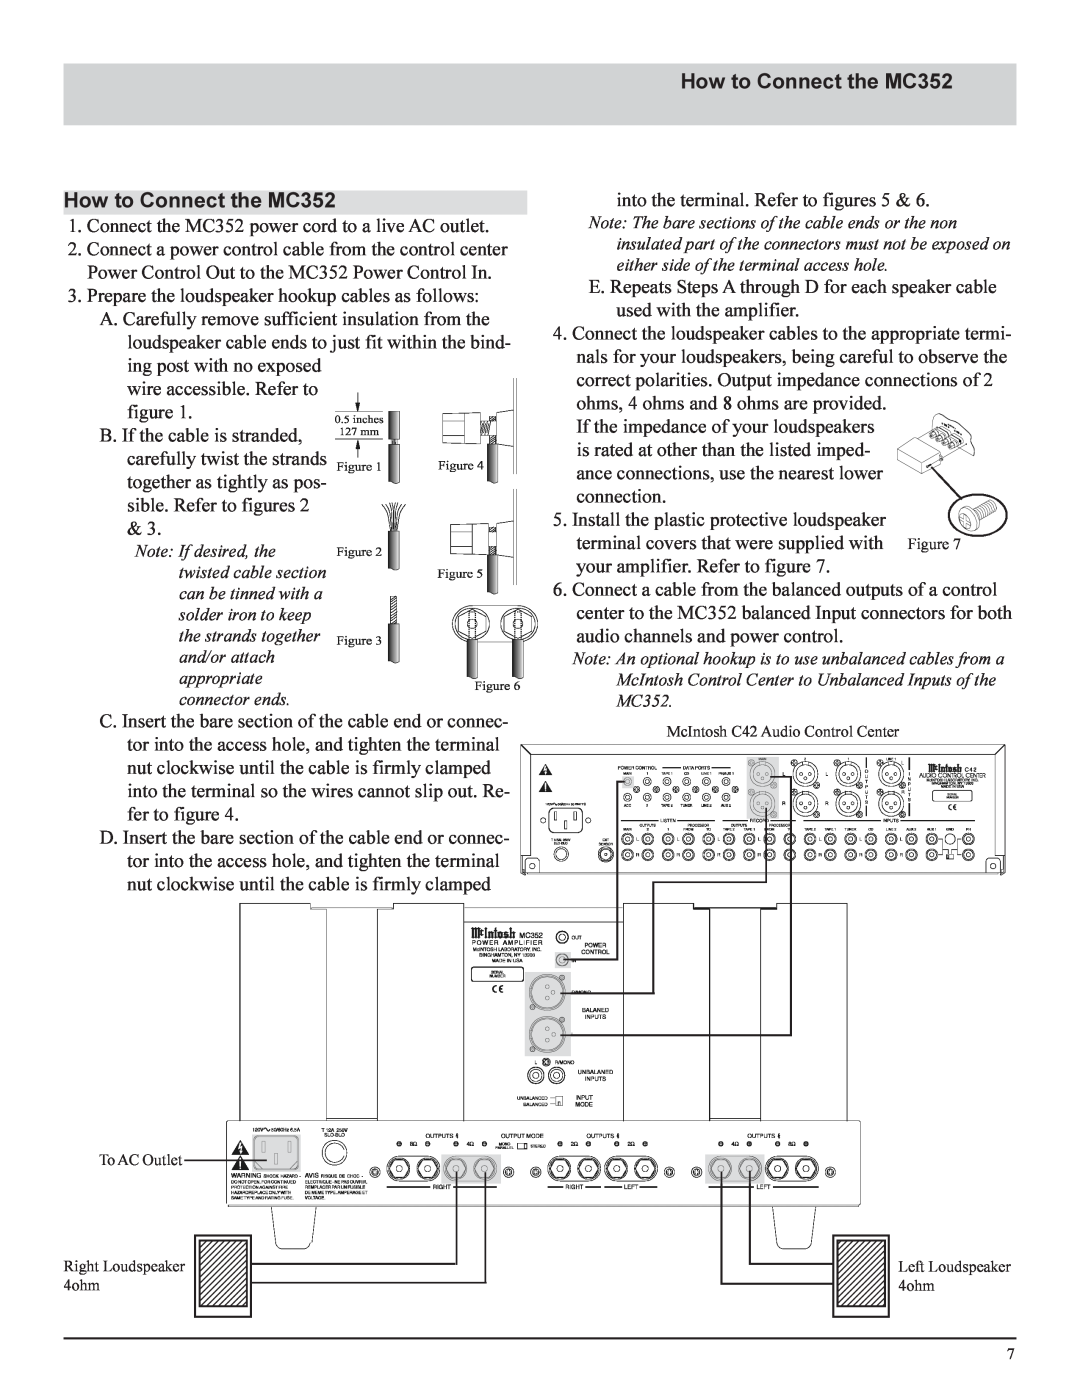 McIntosh manual How to Connect the MC352 